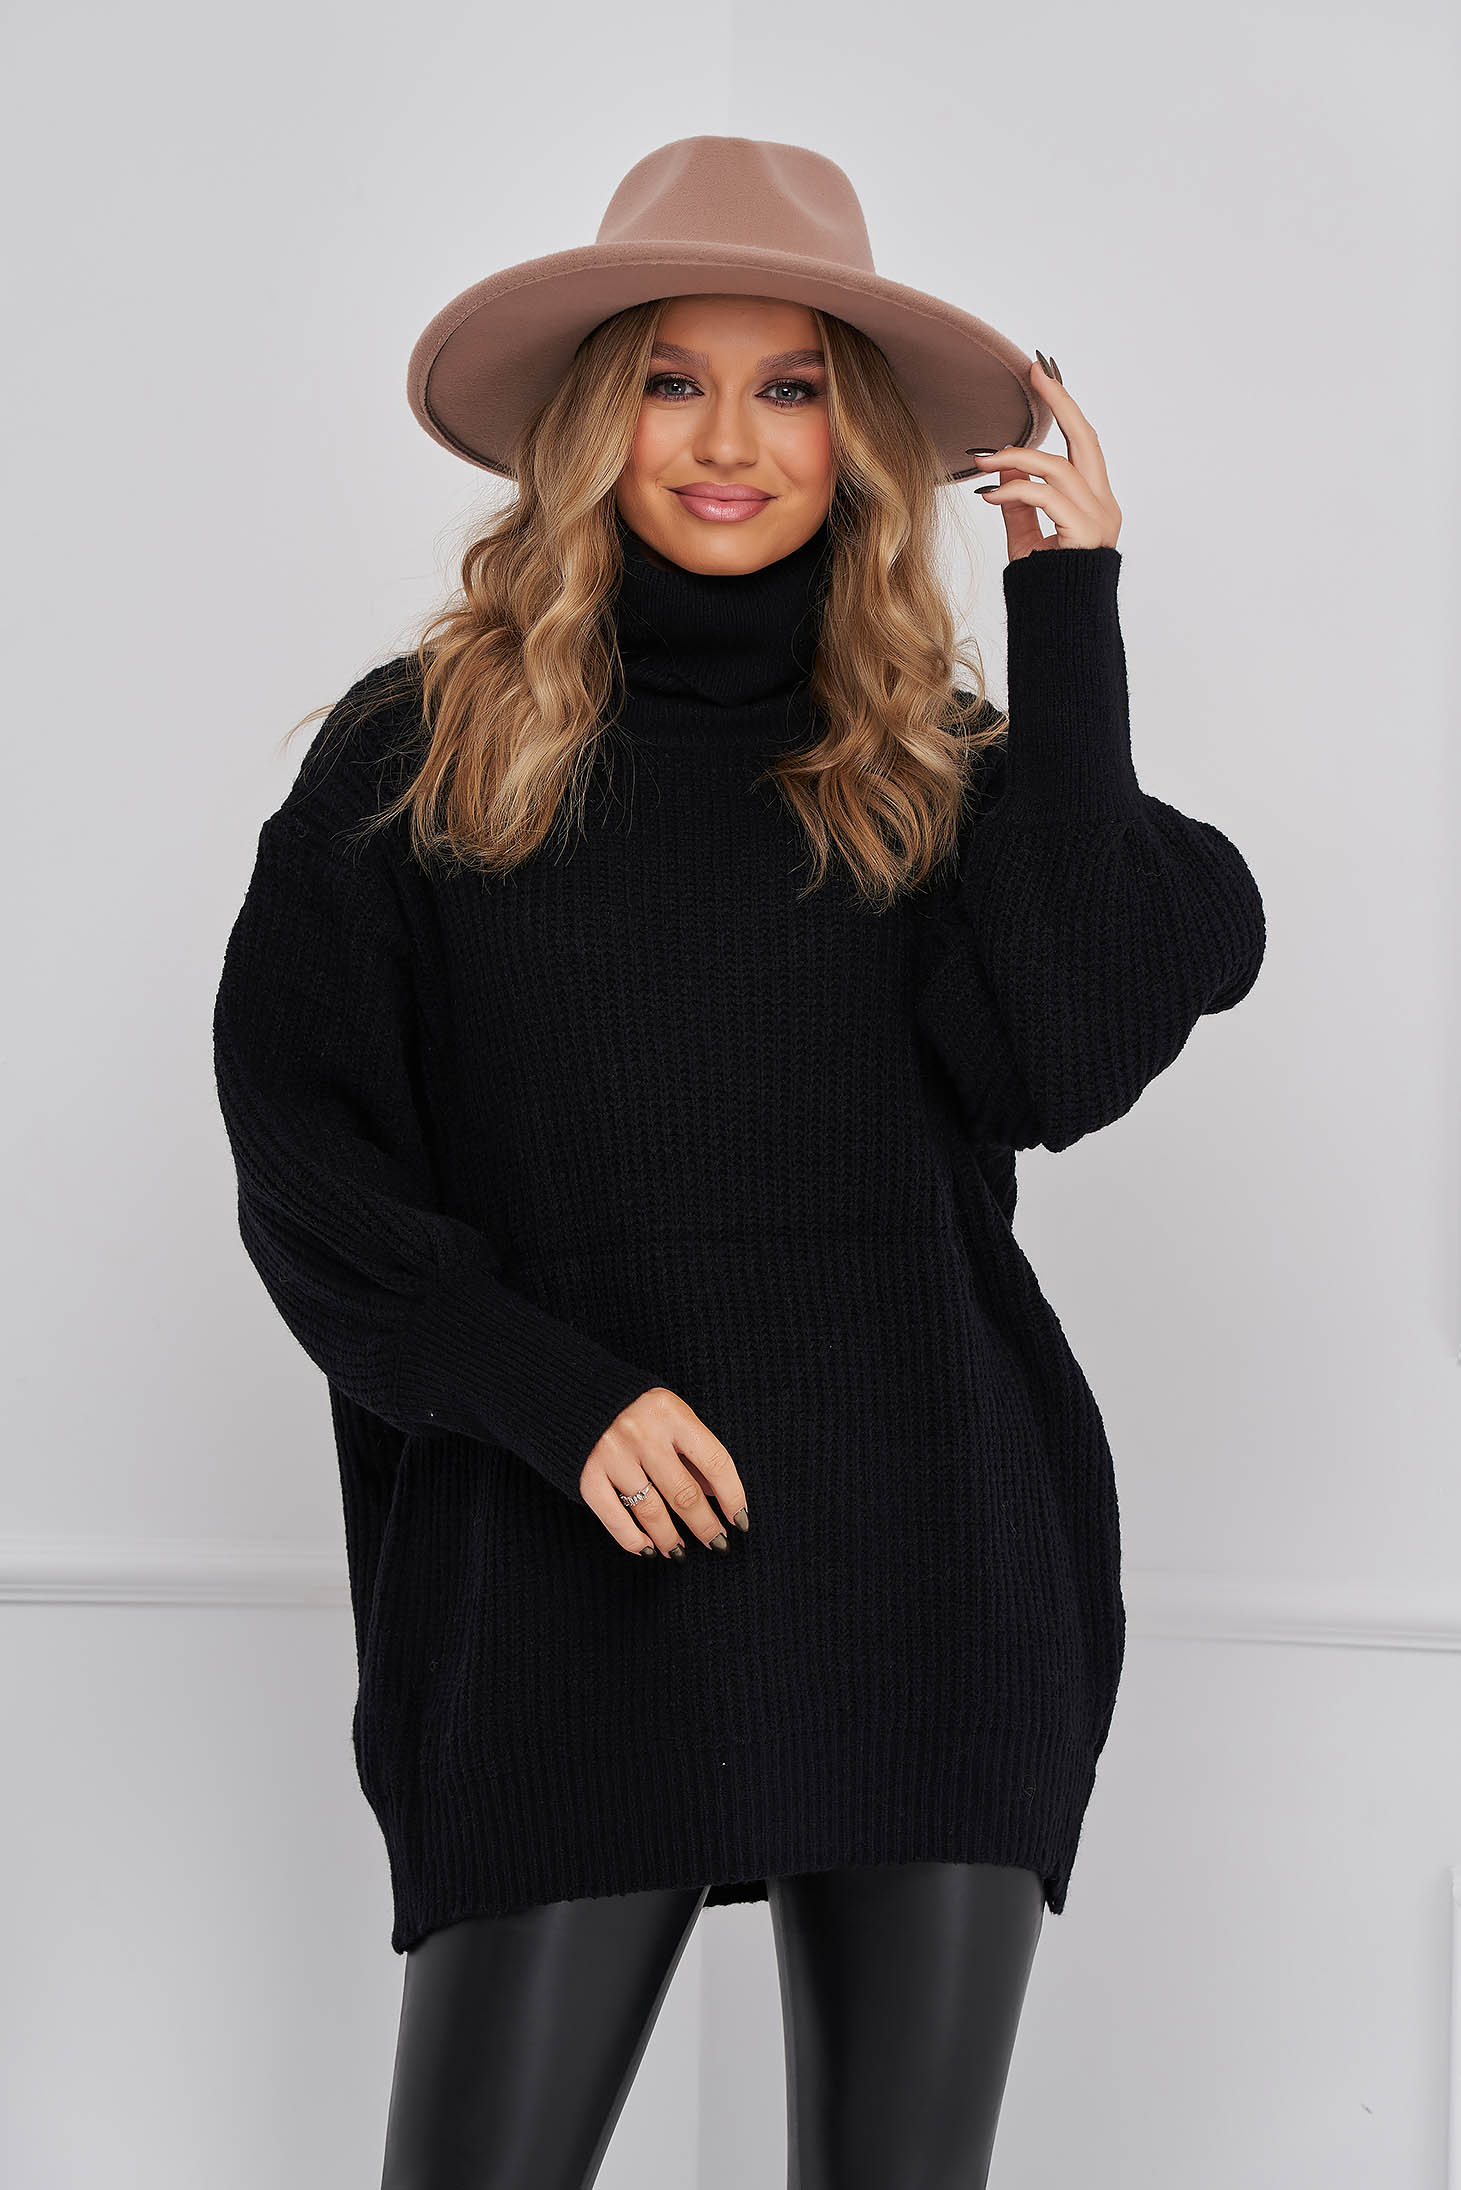 Black sweater knitted loose fit high collar